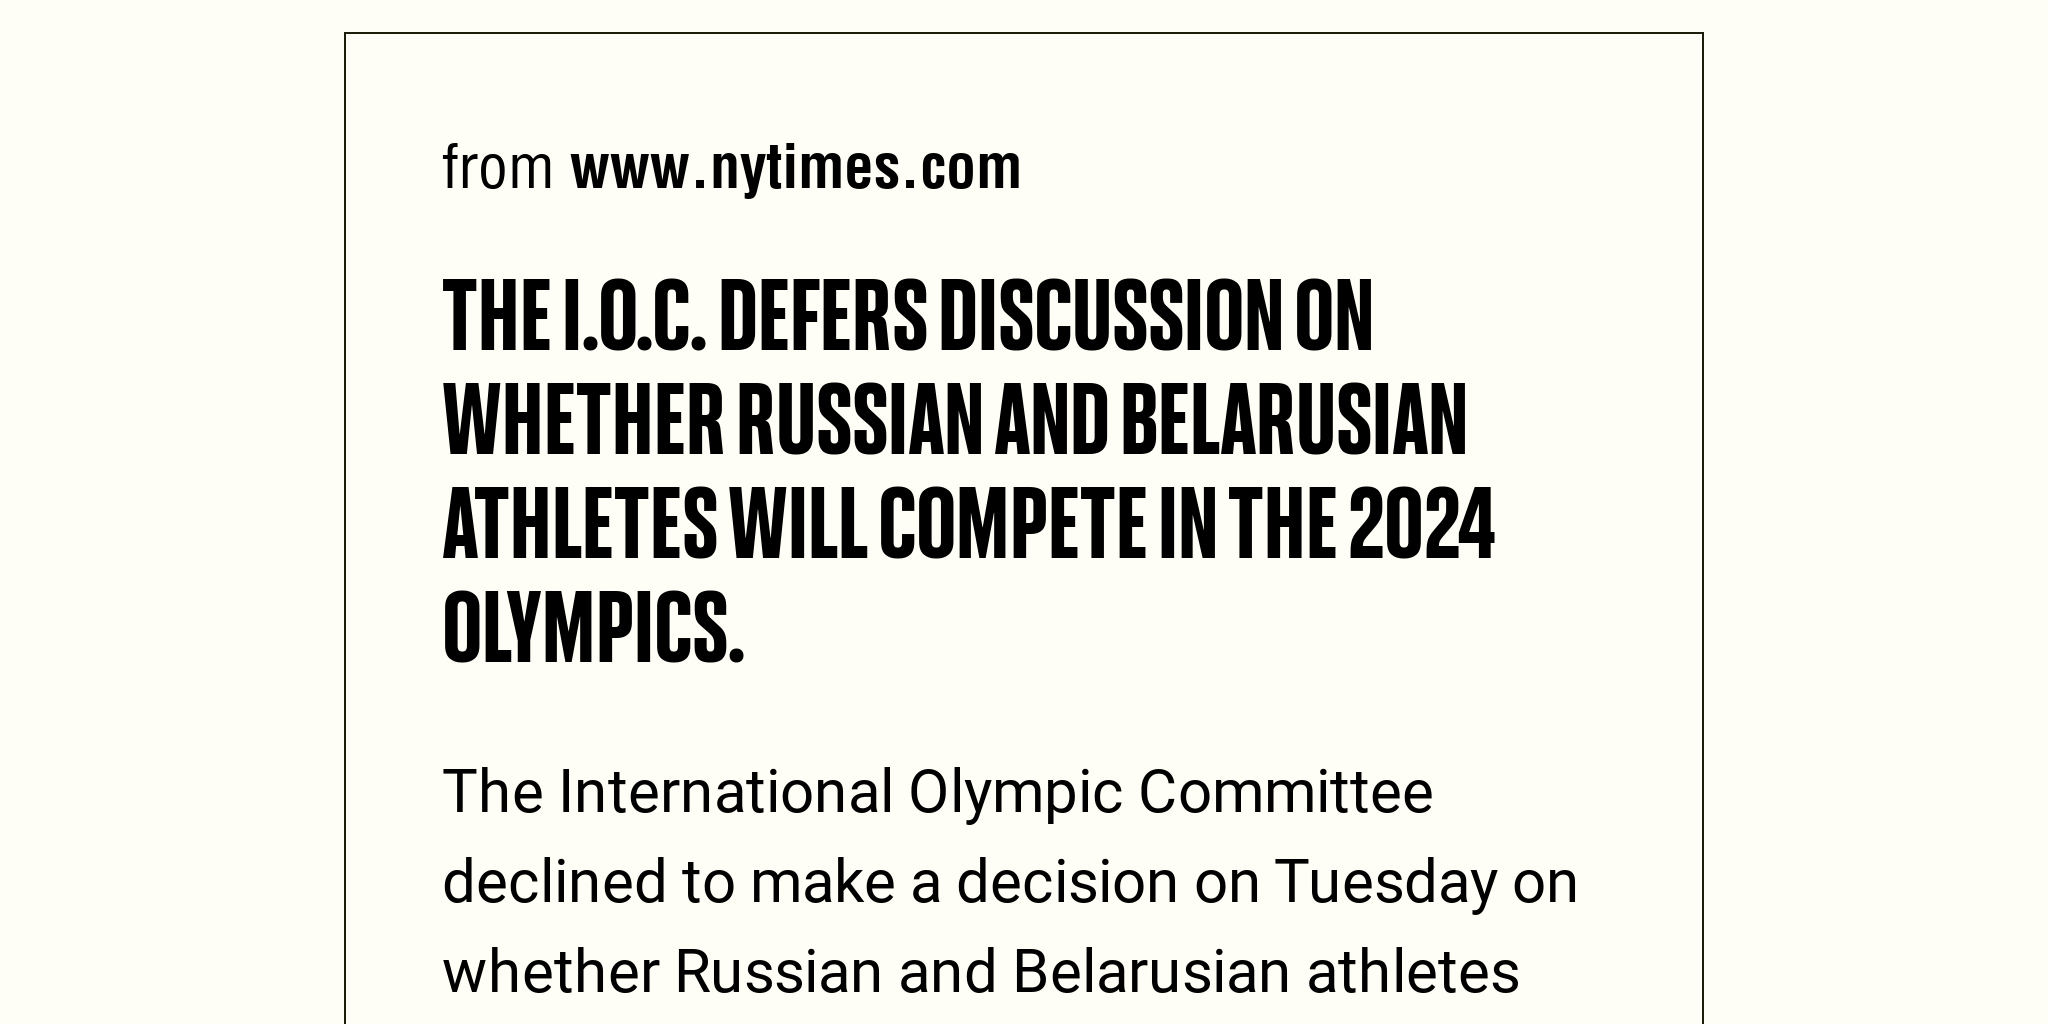 The I.O.C. defers discussion on whether Russian and Belarusian athletes